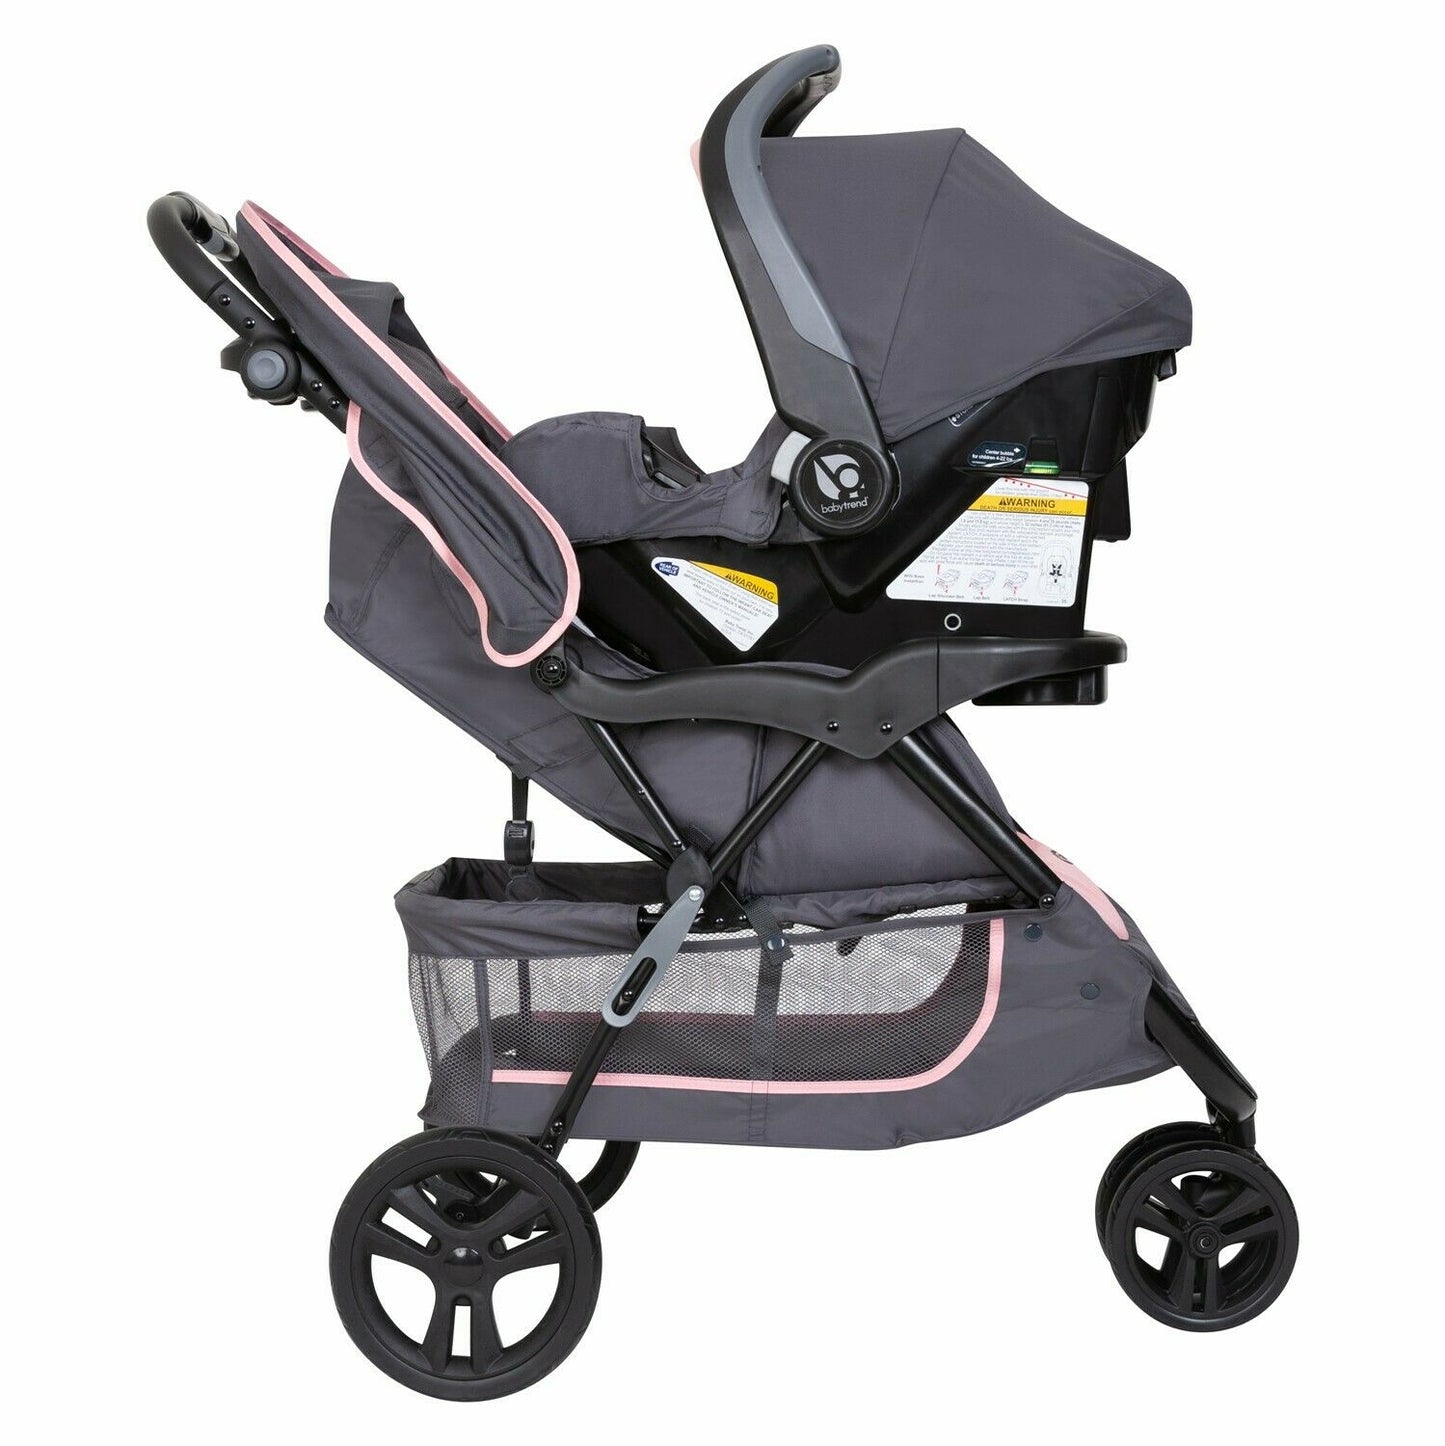 Baby Stroller with Car Seat Travel System Playard High Chair Combo Pink